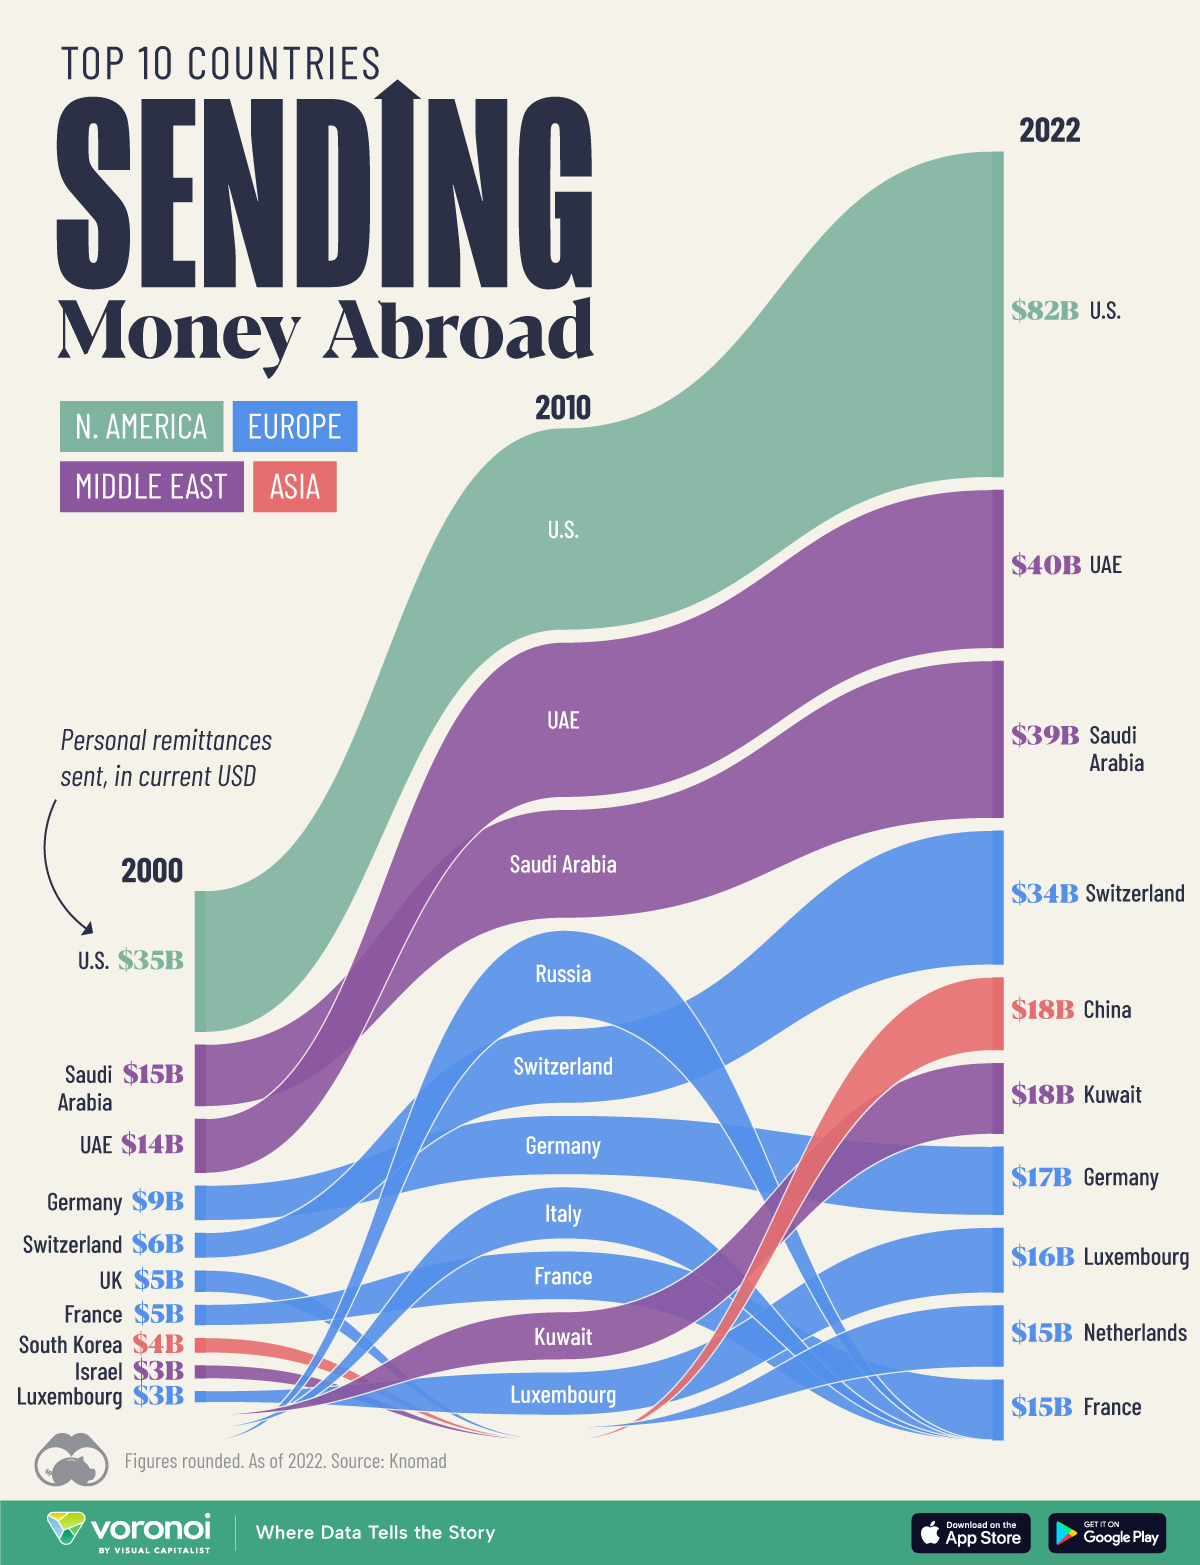 A chart with the top countries by personal remittances sent, in current U.S. dollars, based on 2022 data from Knomad.